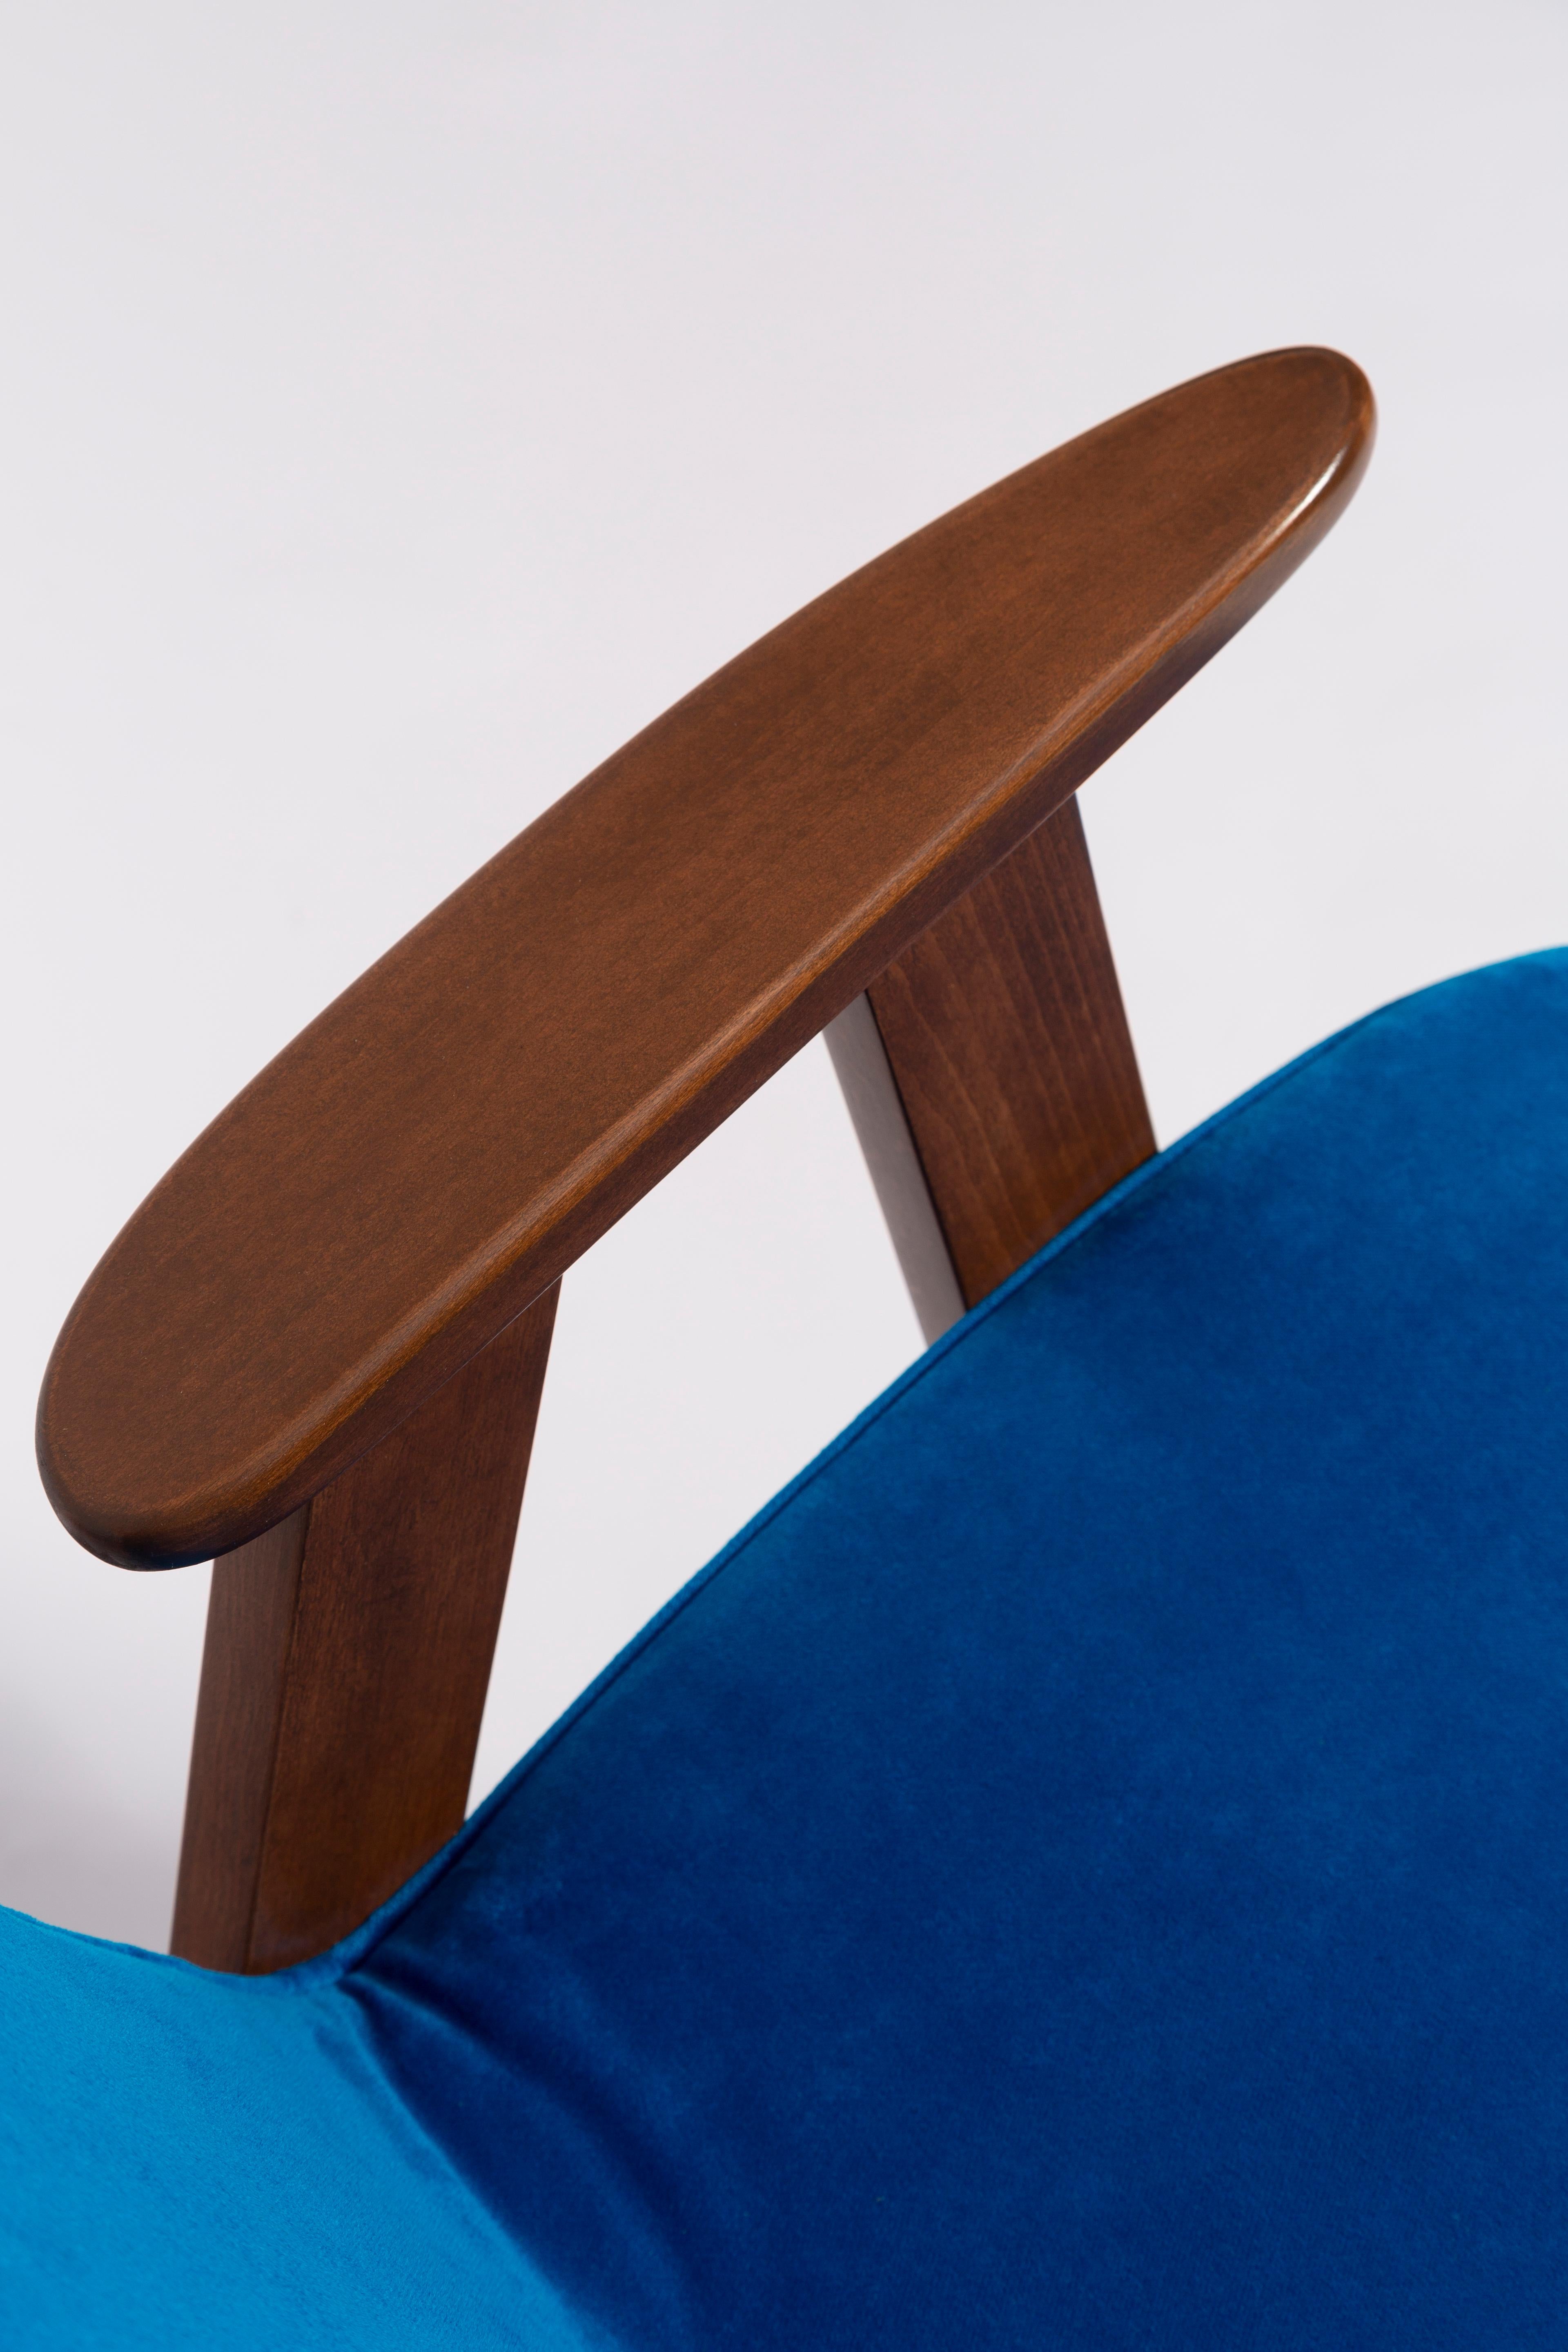 Polish Mid-Century 366 Armchair in Blue Velvet, by Jozef Chierowski, Europe 1960s For Sale